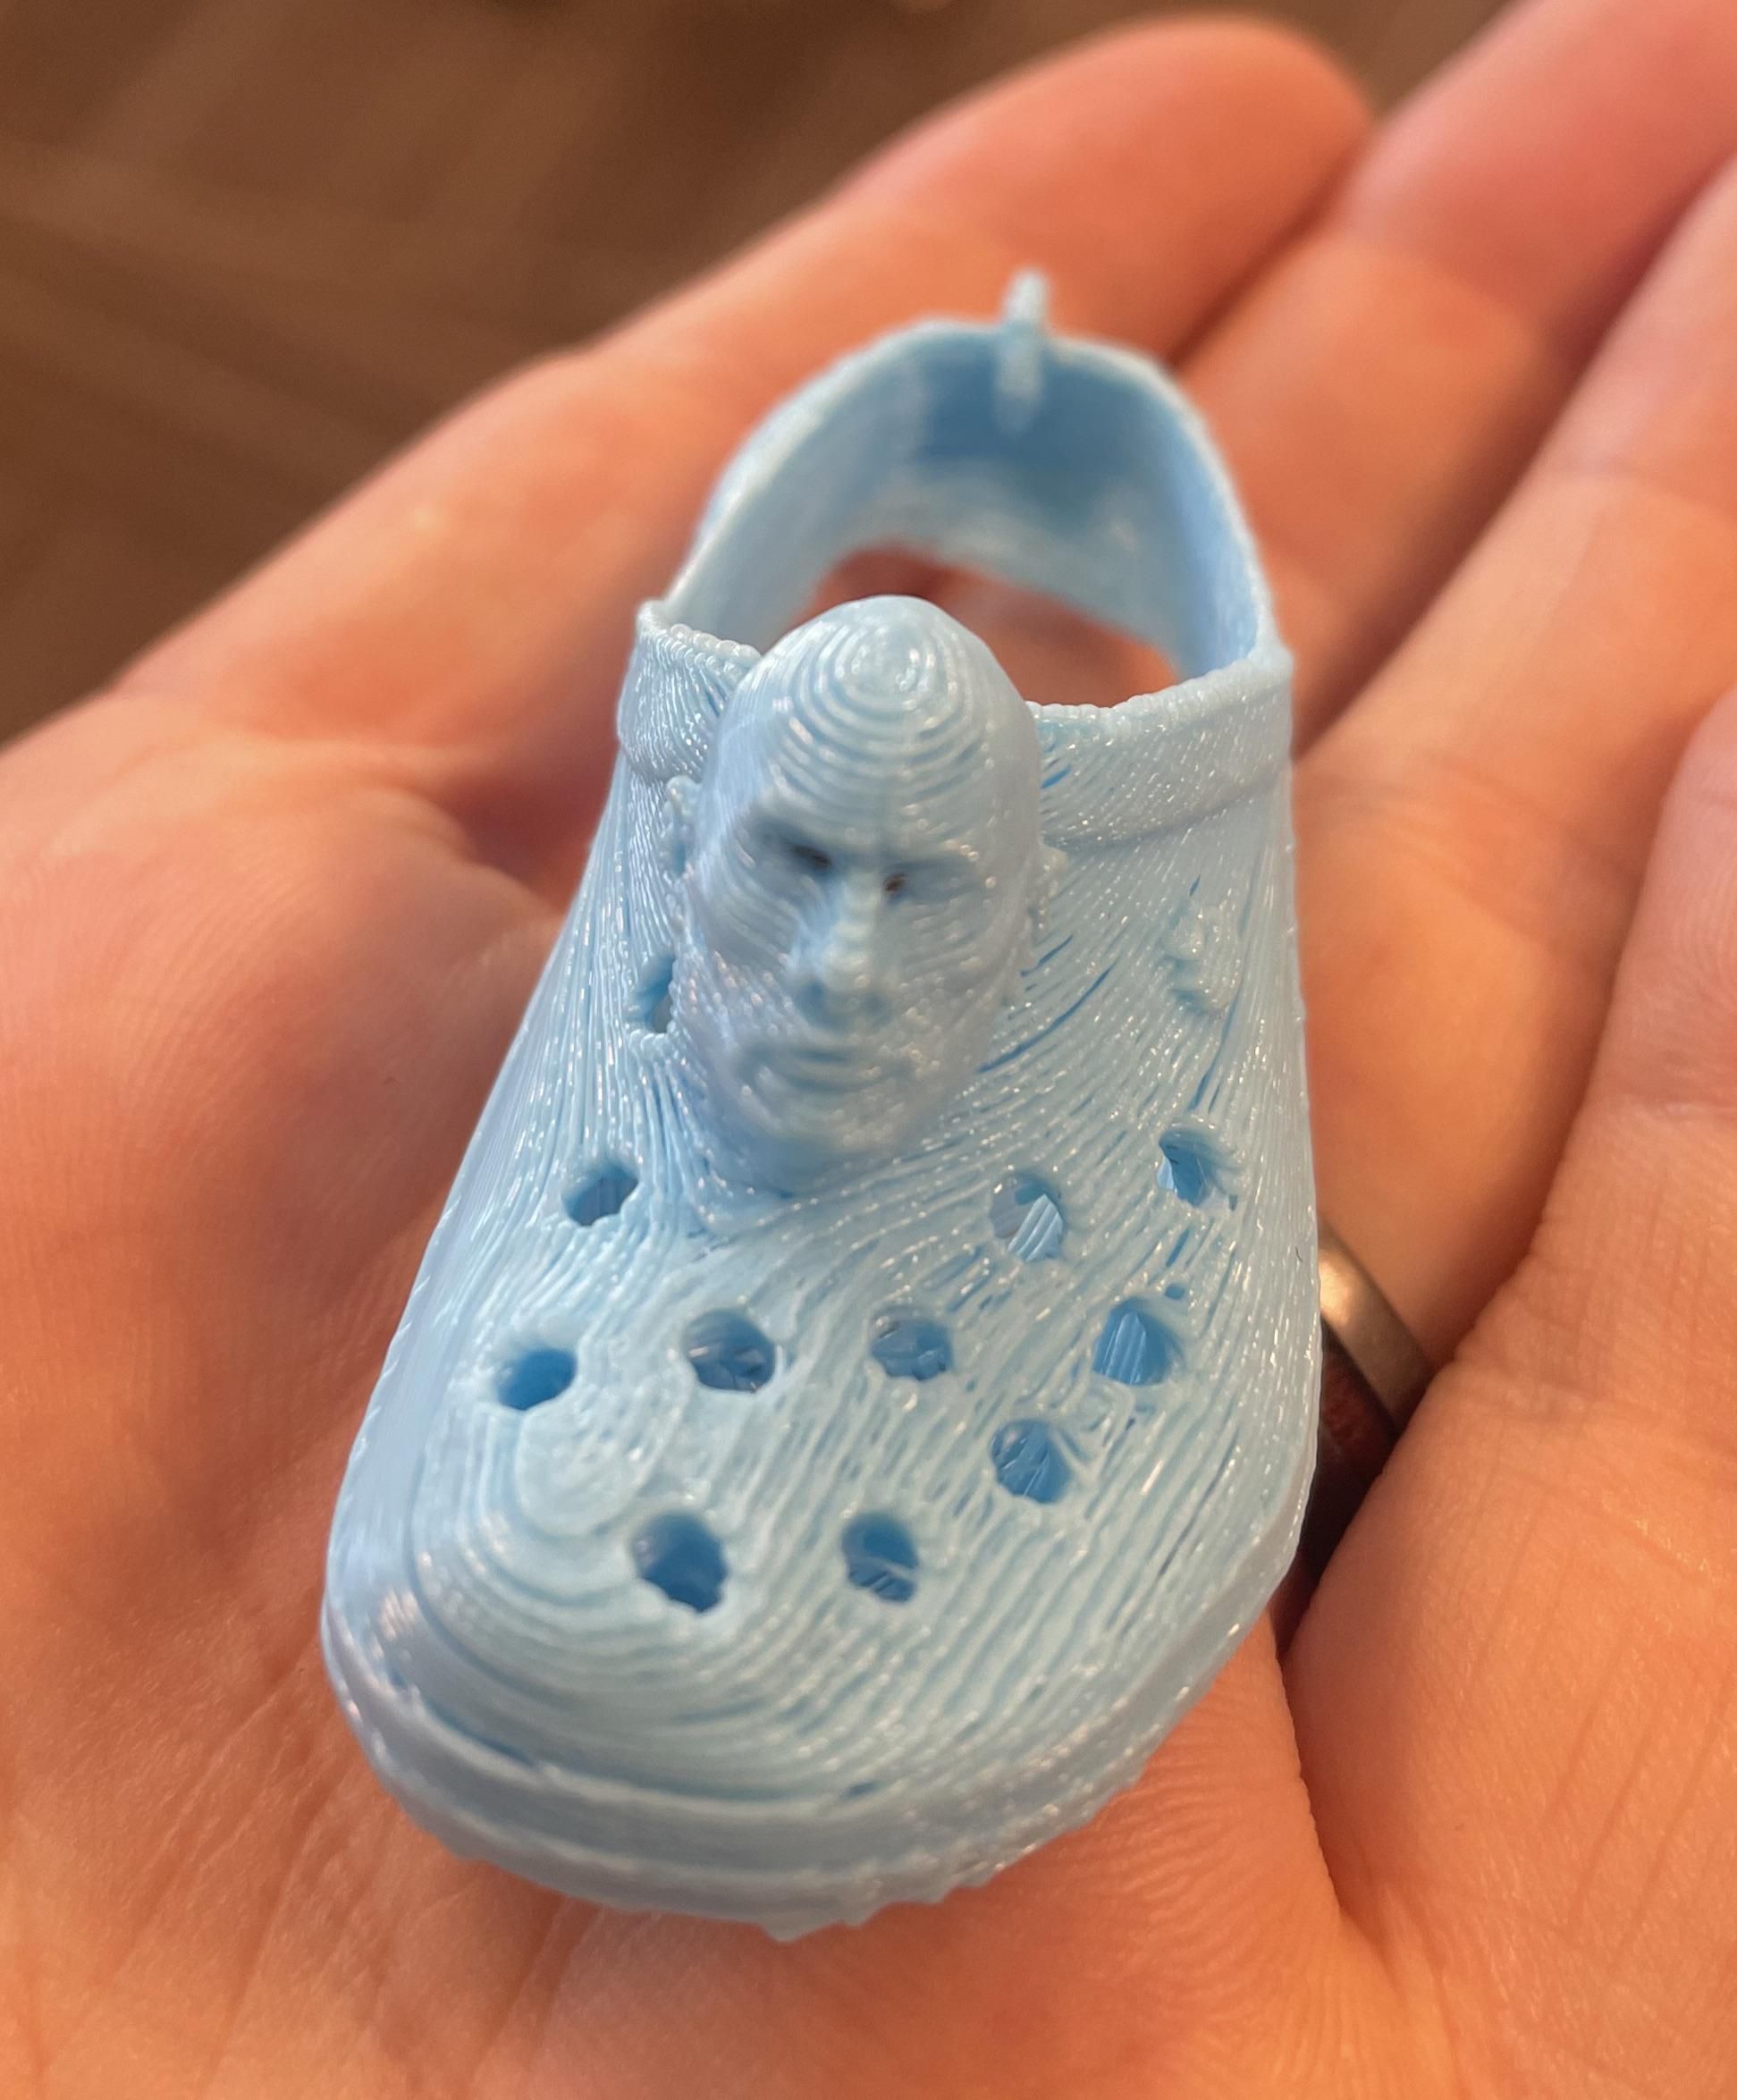 My students are carrying around 3D printed “Dwayne the Crock Johnsons”